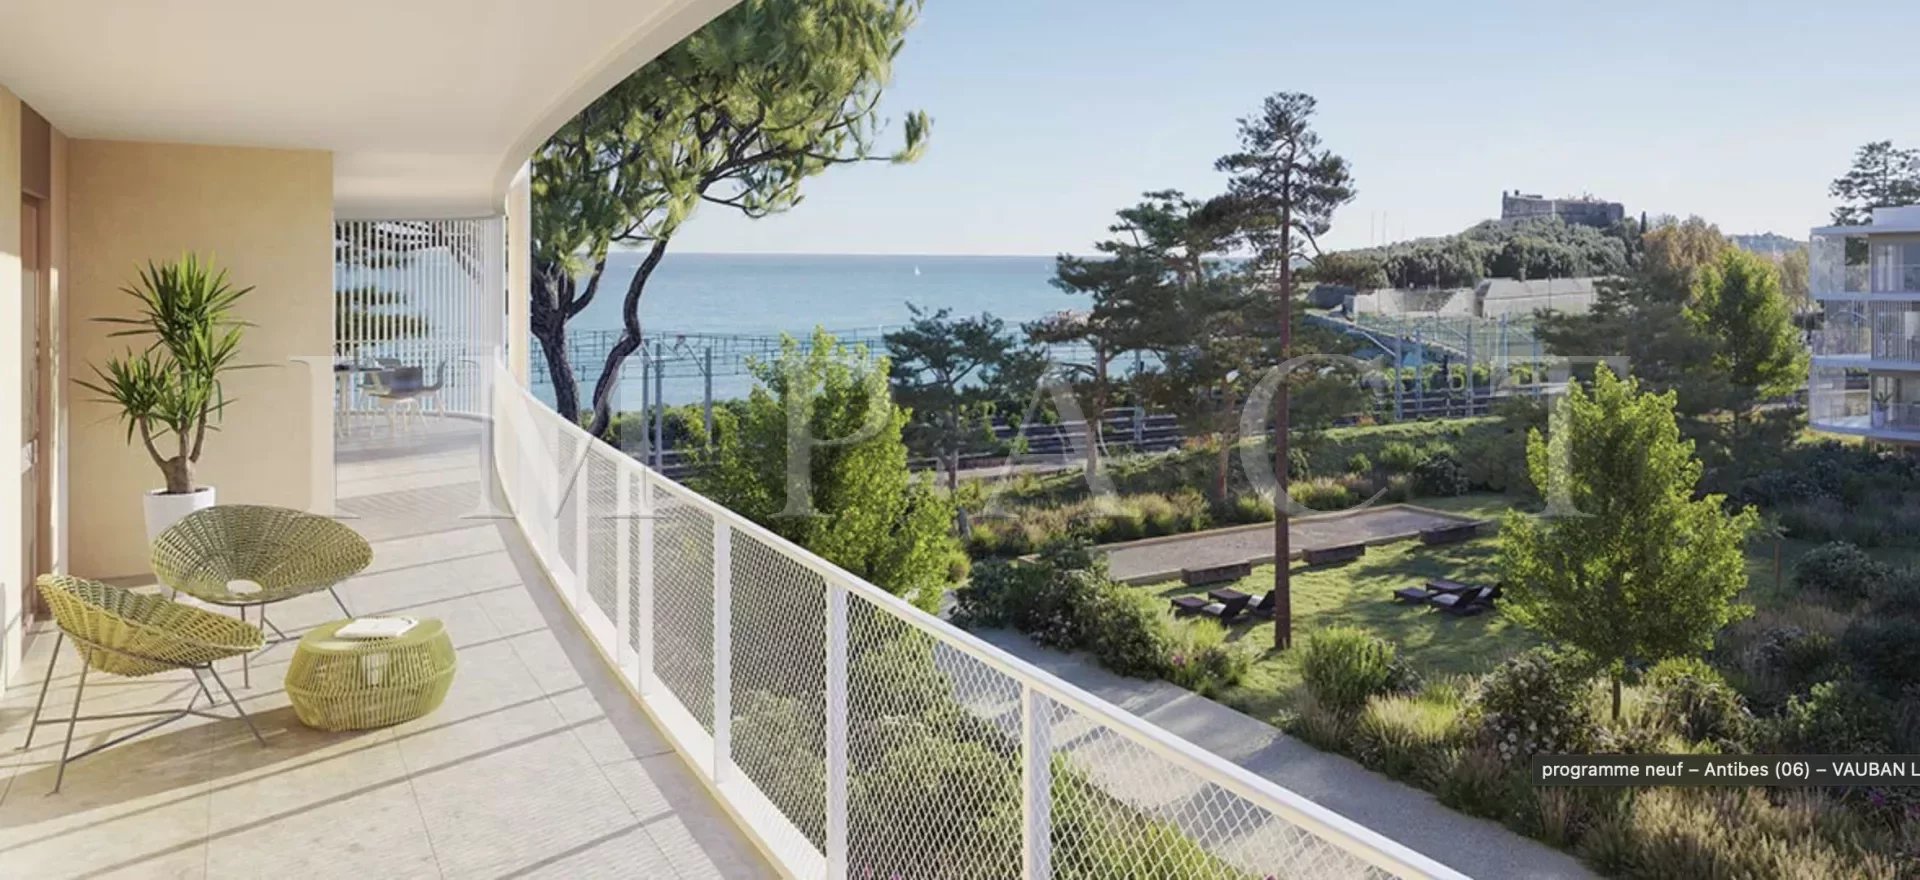 Antibes Center, 3 Rooms in a new residence for sale